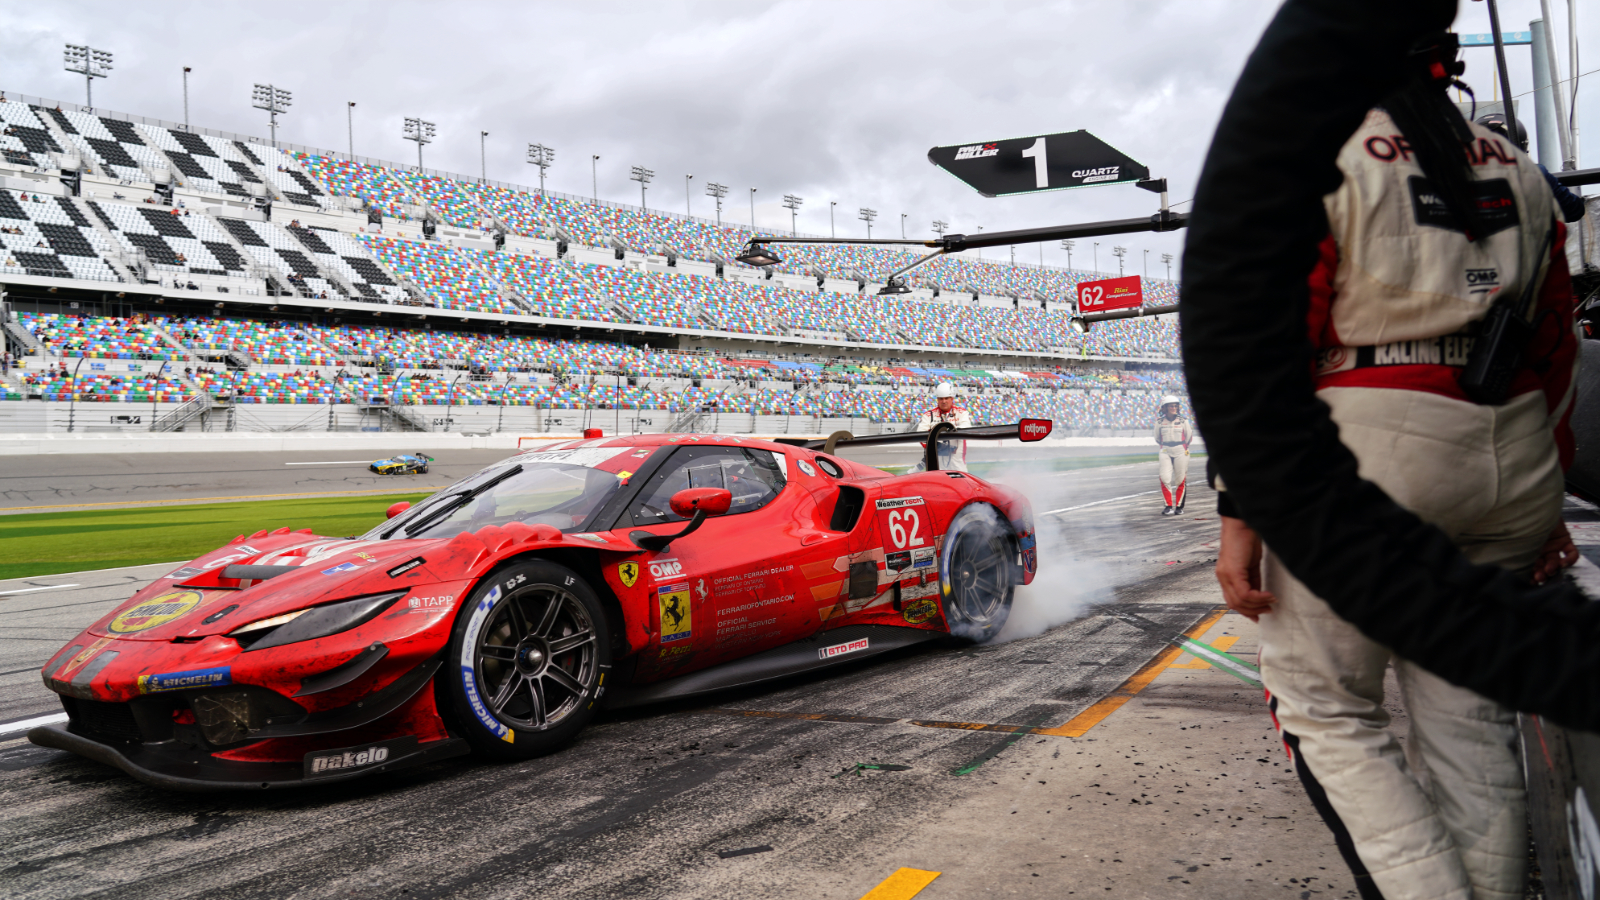 Titans of the Track: BMW and Ferrari Face Setback in Daytona 24 GTD Championship